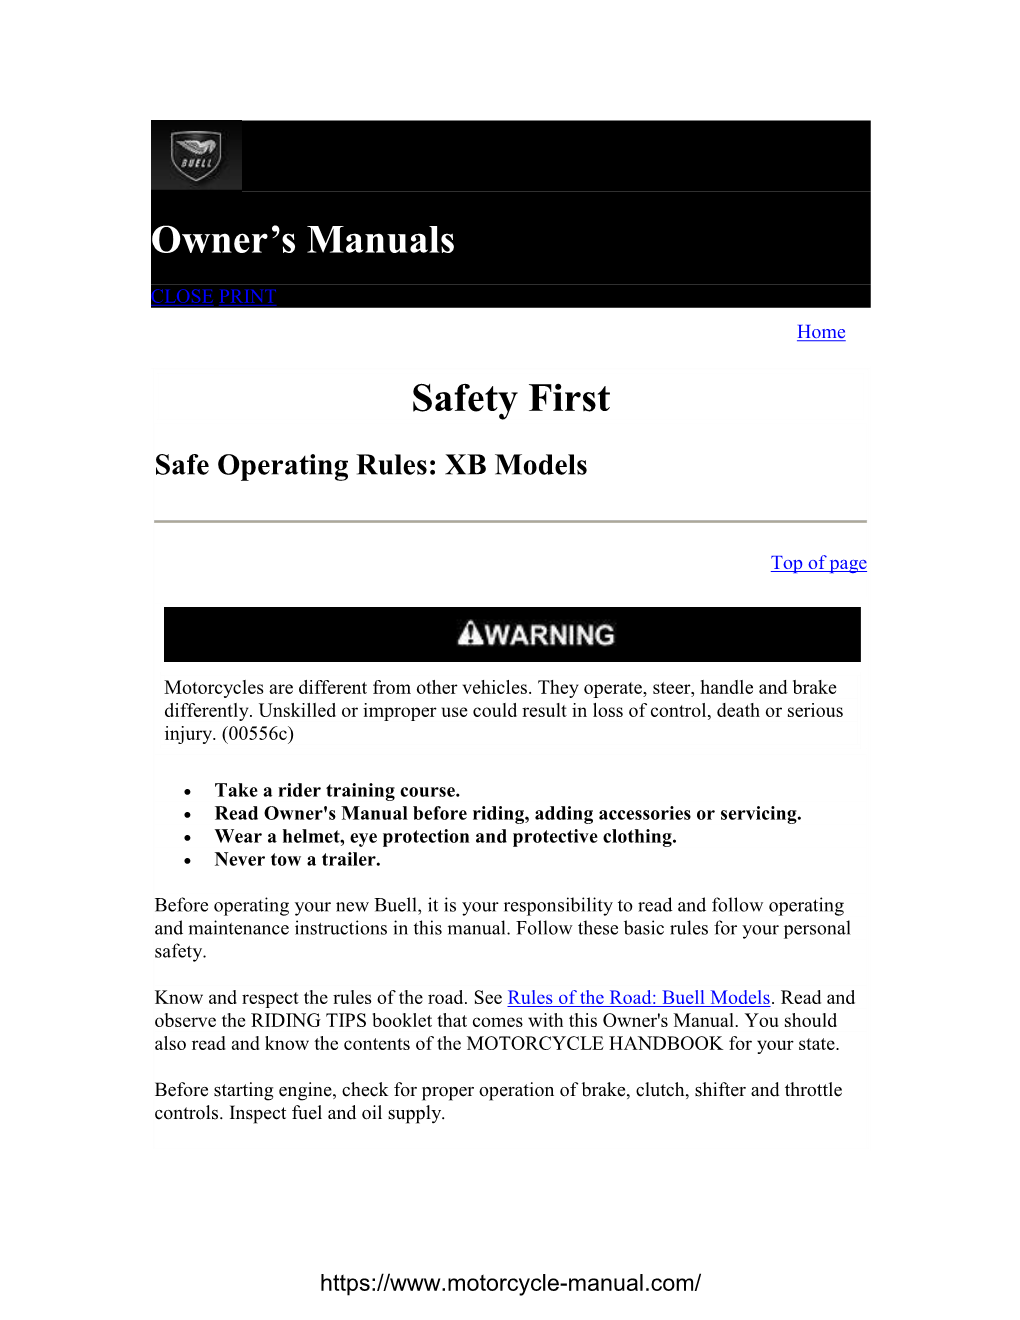 Owner's Manuals Safety First